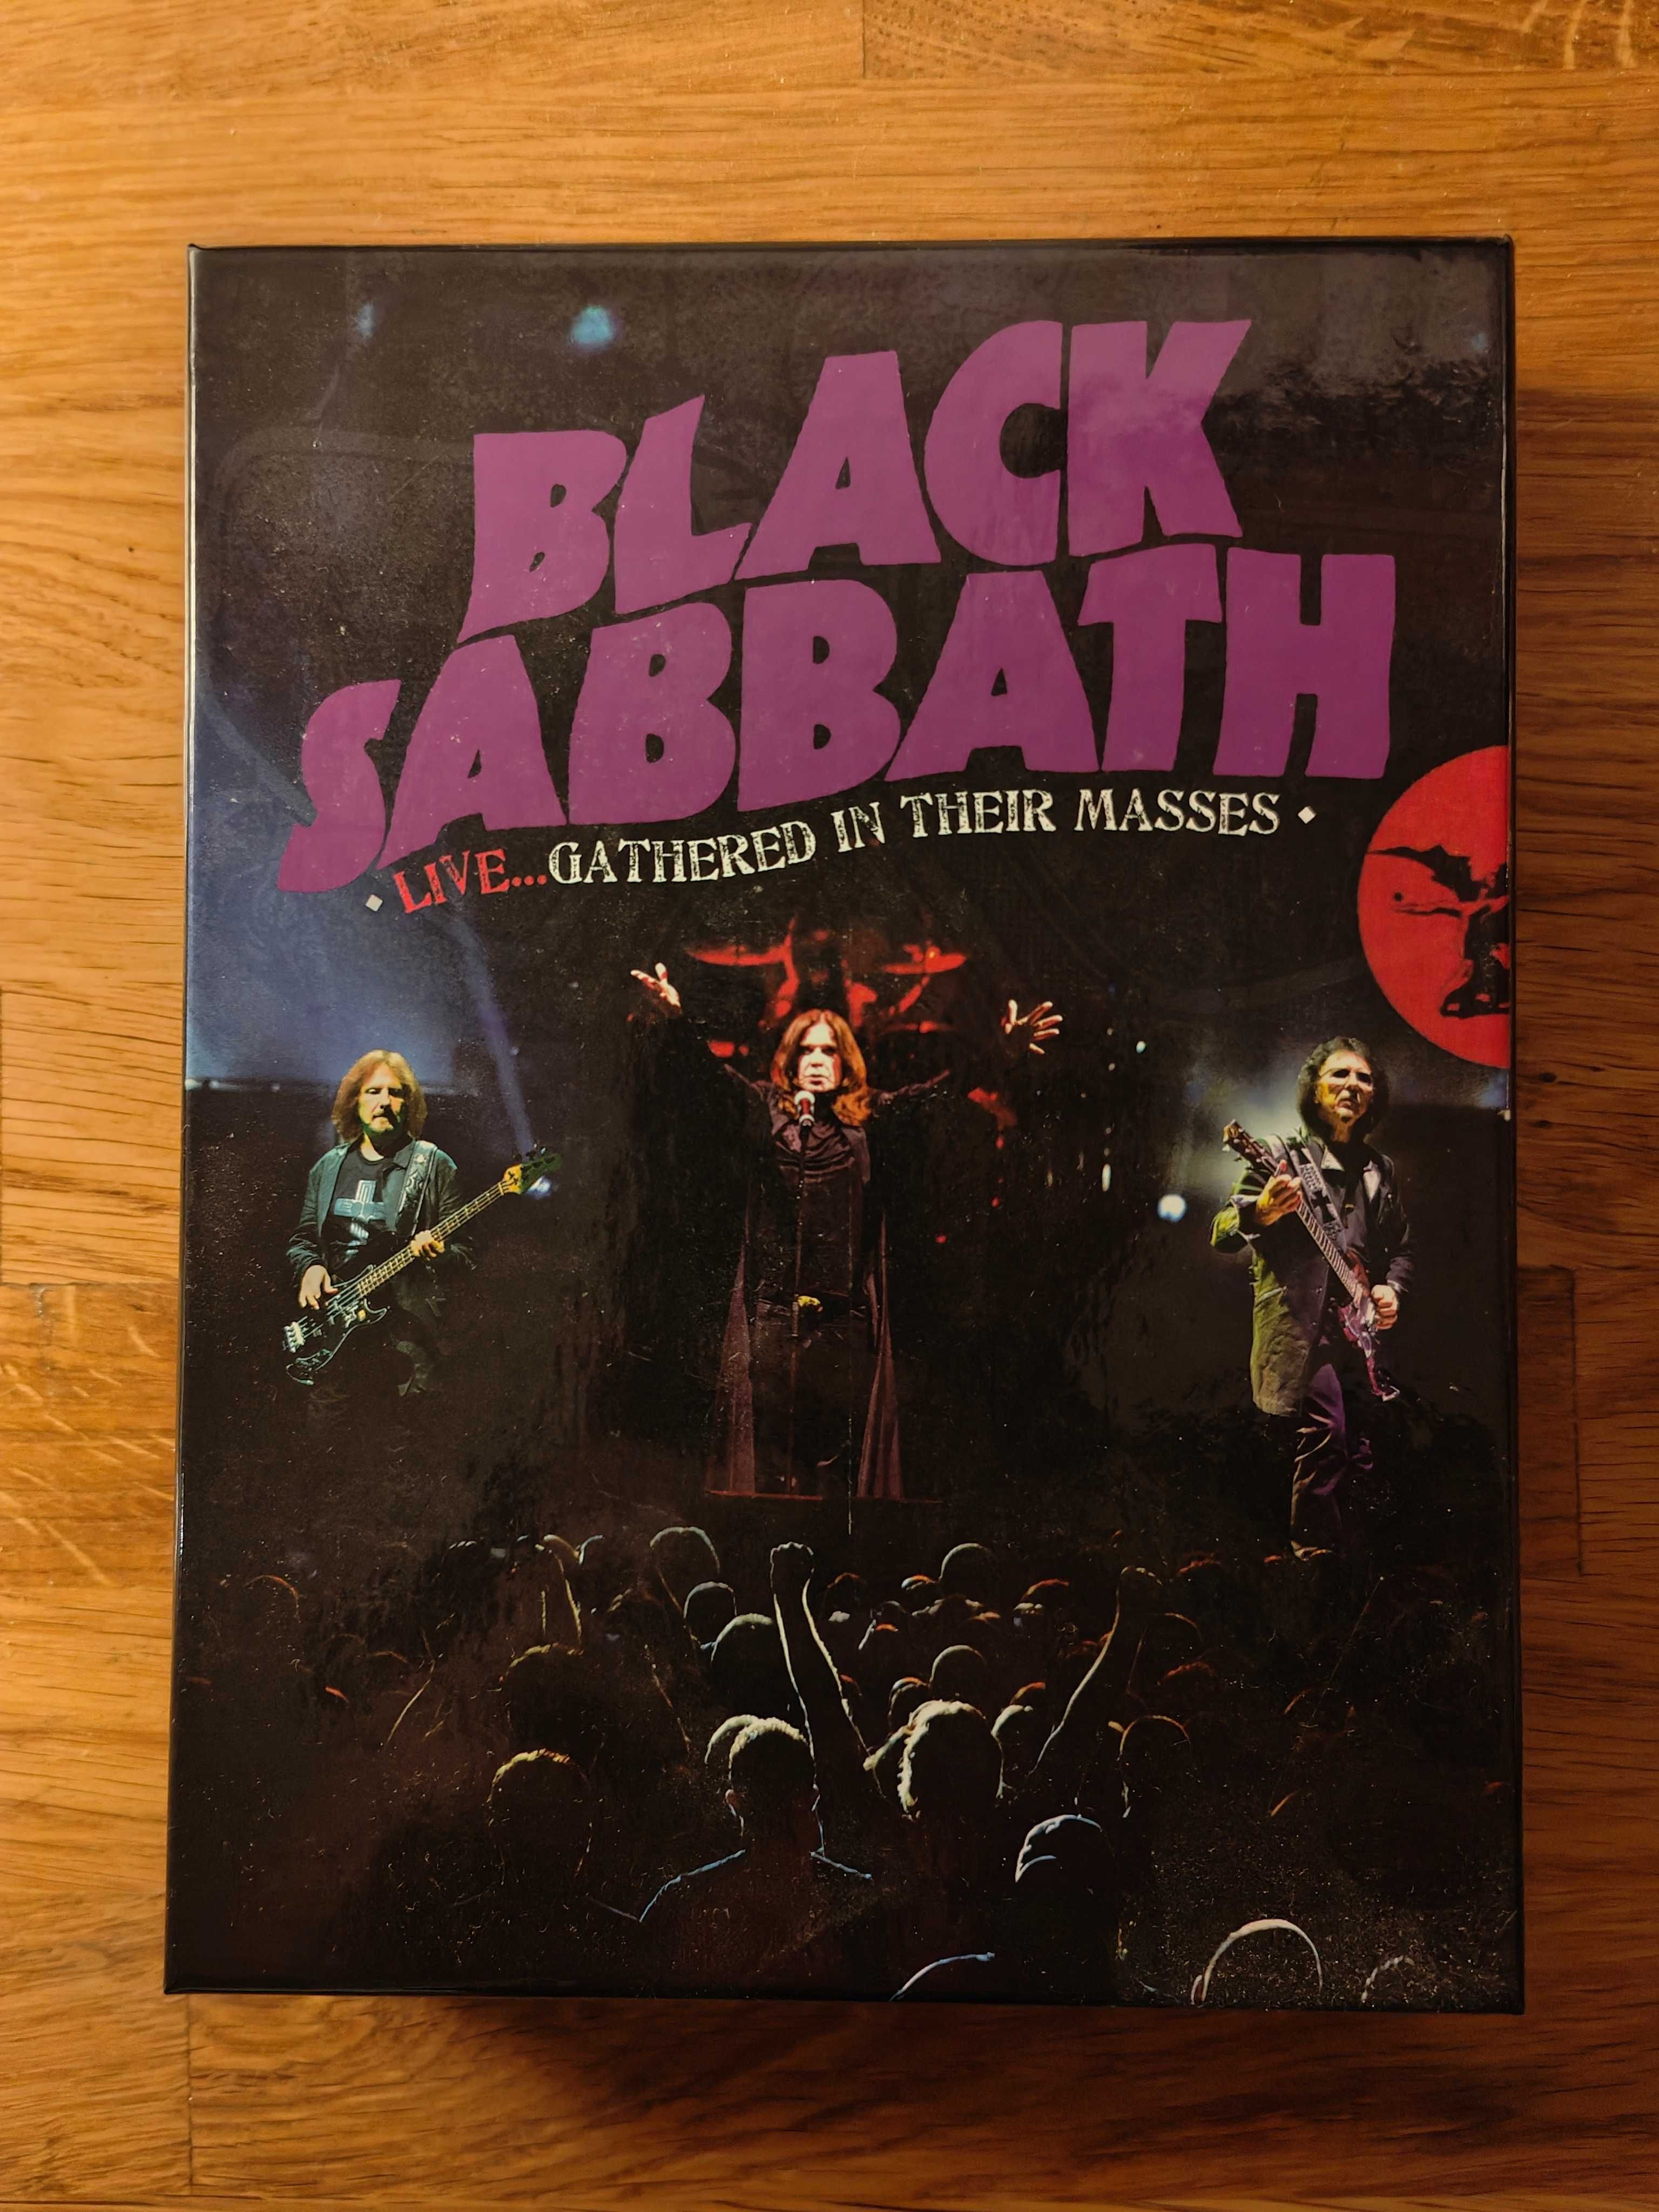 Black Sabbath Live...Gathered In Their Masses (Deluxe Box)